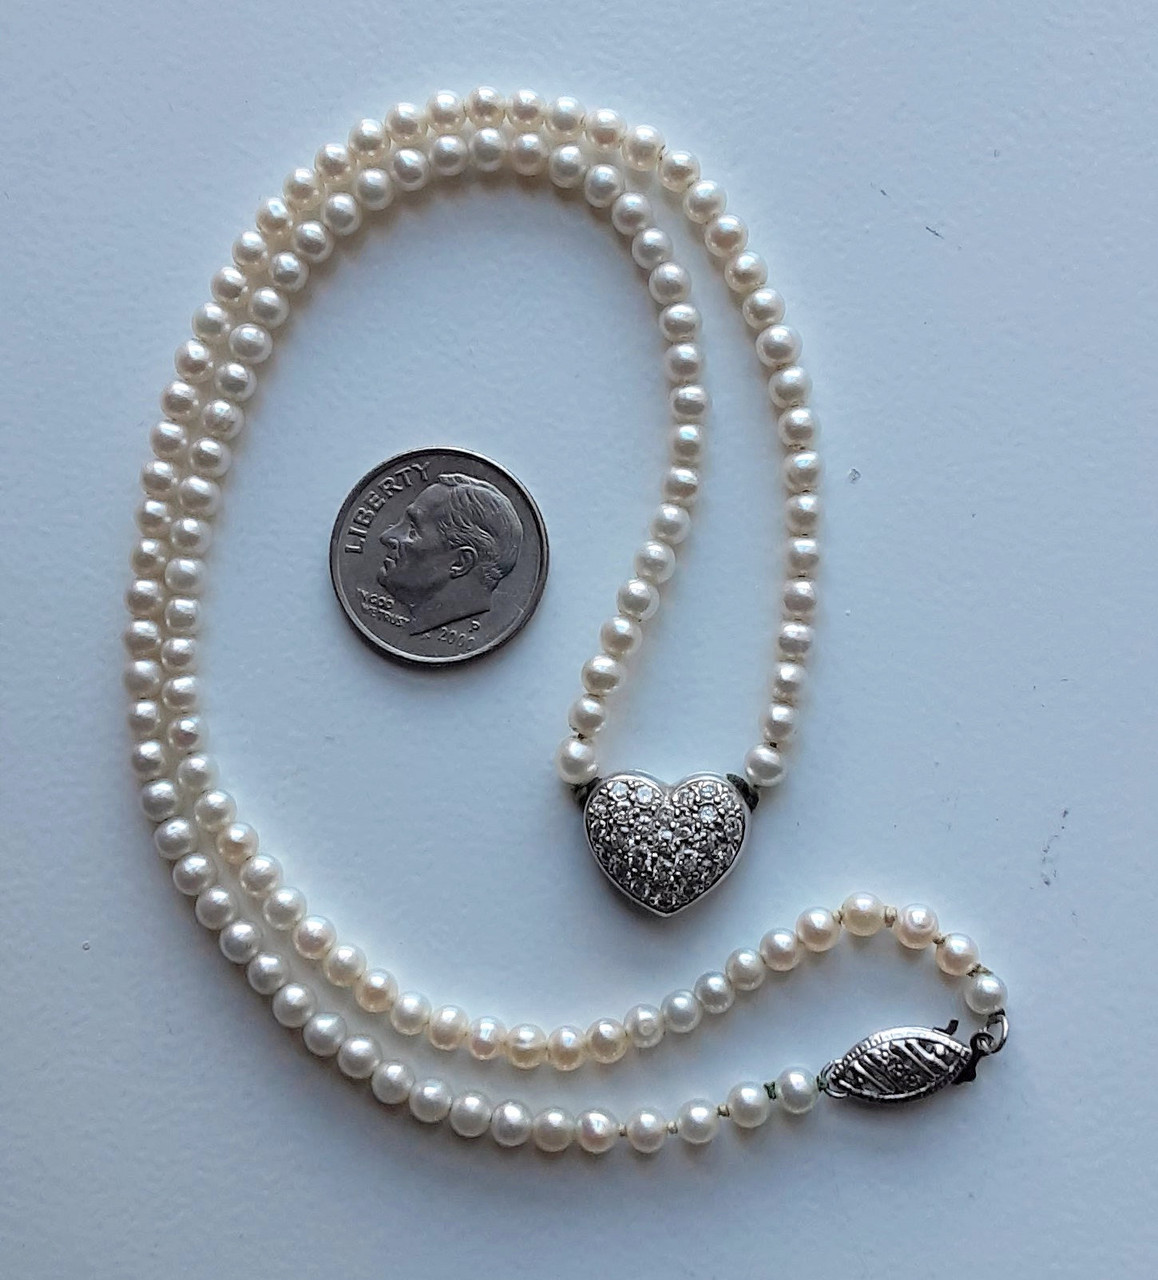 Small 4-5mm Genuine Natural White Freshwater Rice-shaped Pearl Necklace  18'' | eBay